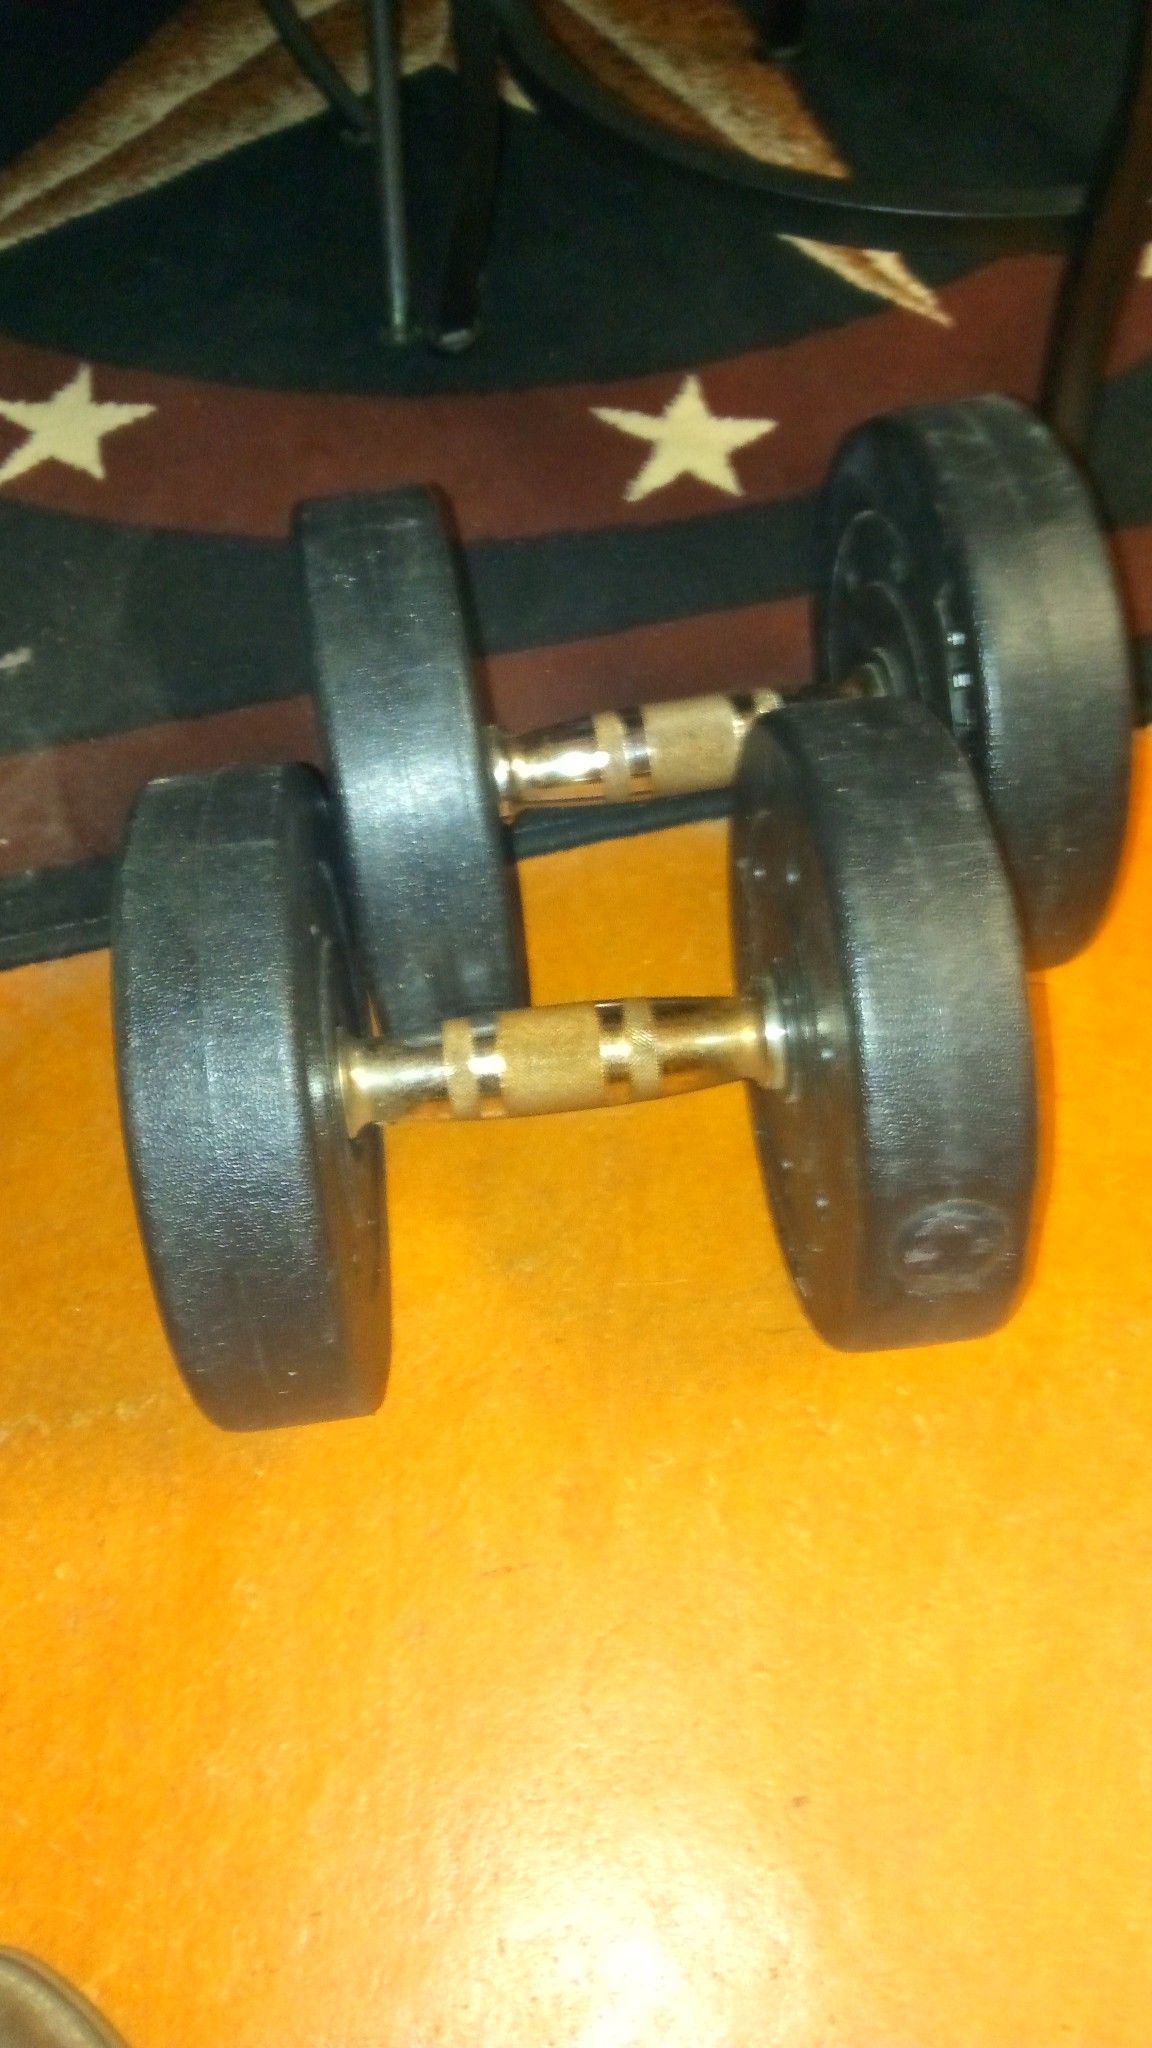 Set of weights 15 lbs each